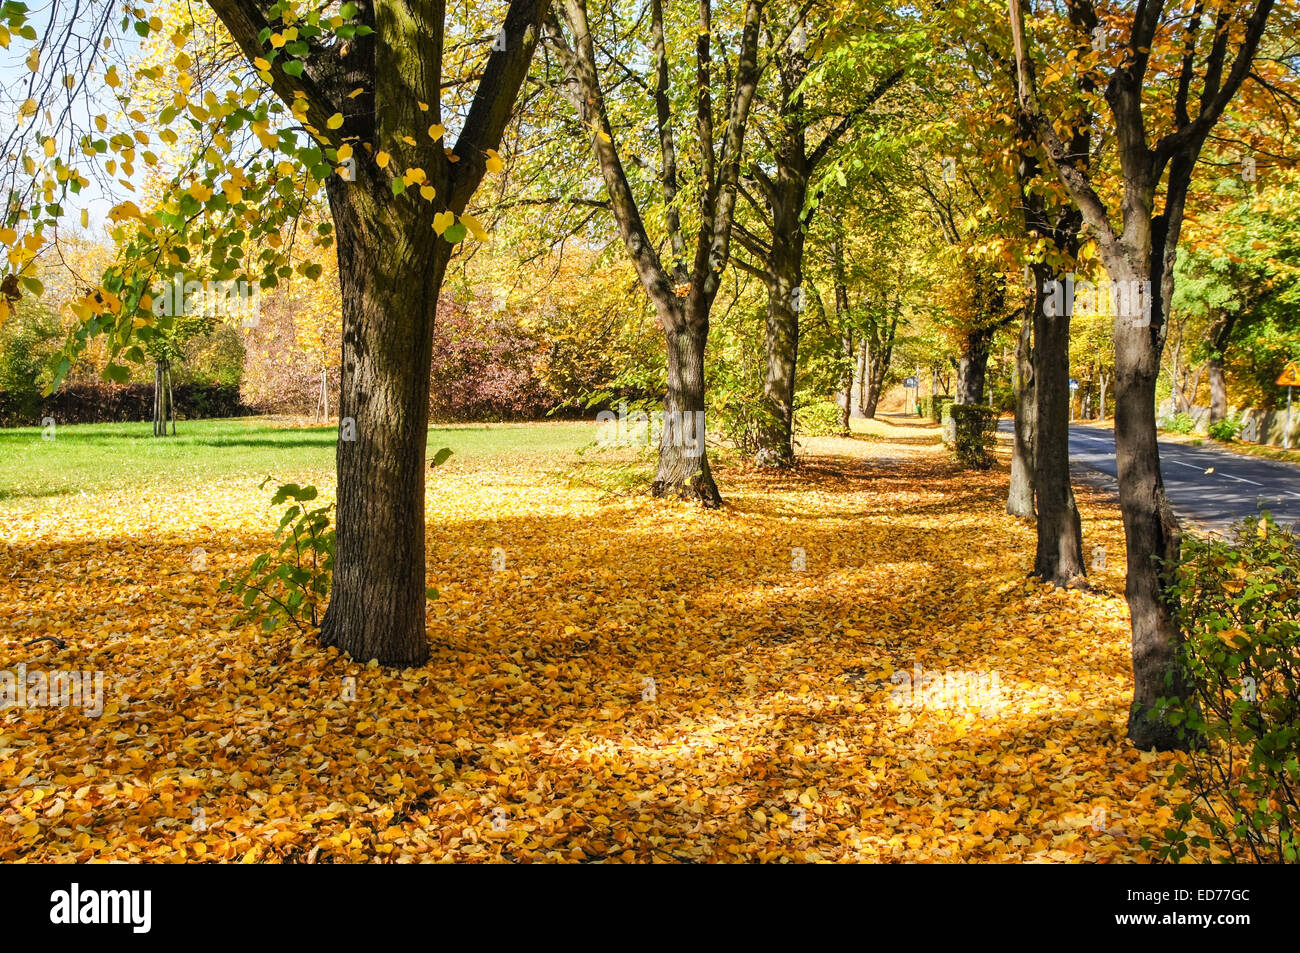 Colorful foliage in the autumnal park Stock Photo